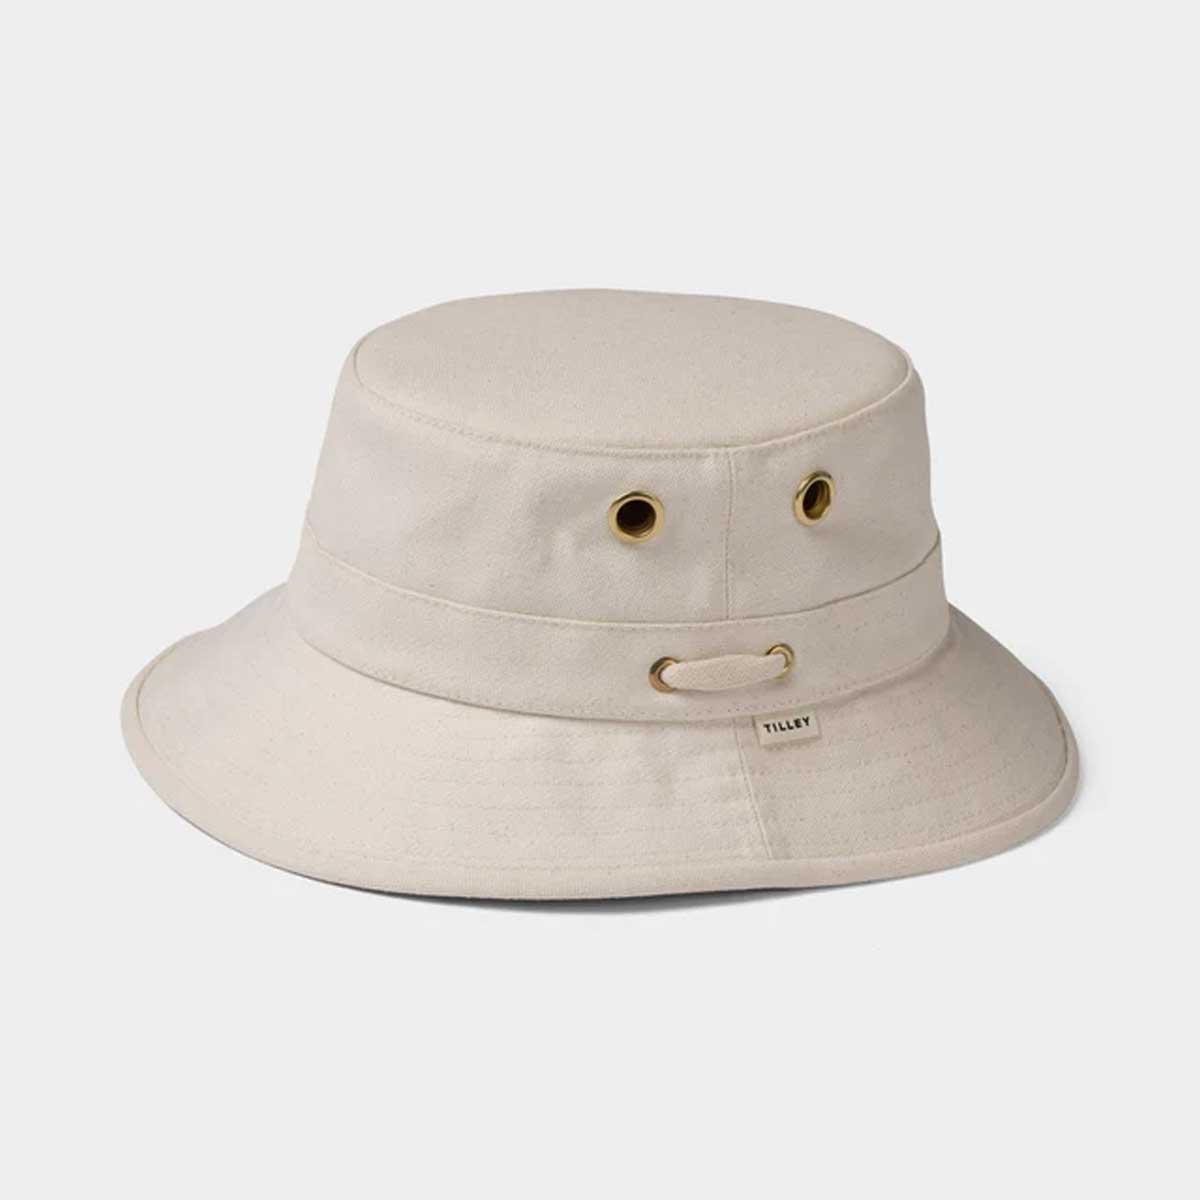 TILLEY Iconic T1 Bucket Hat - Natural